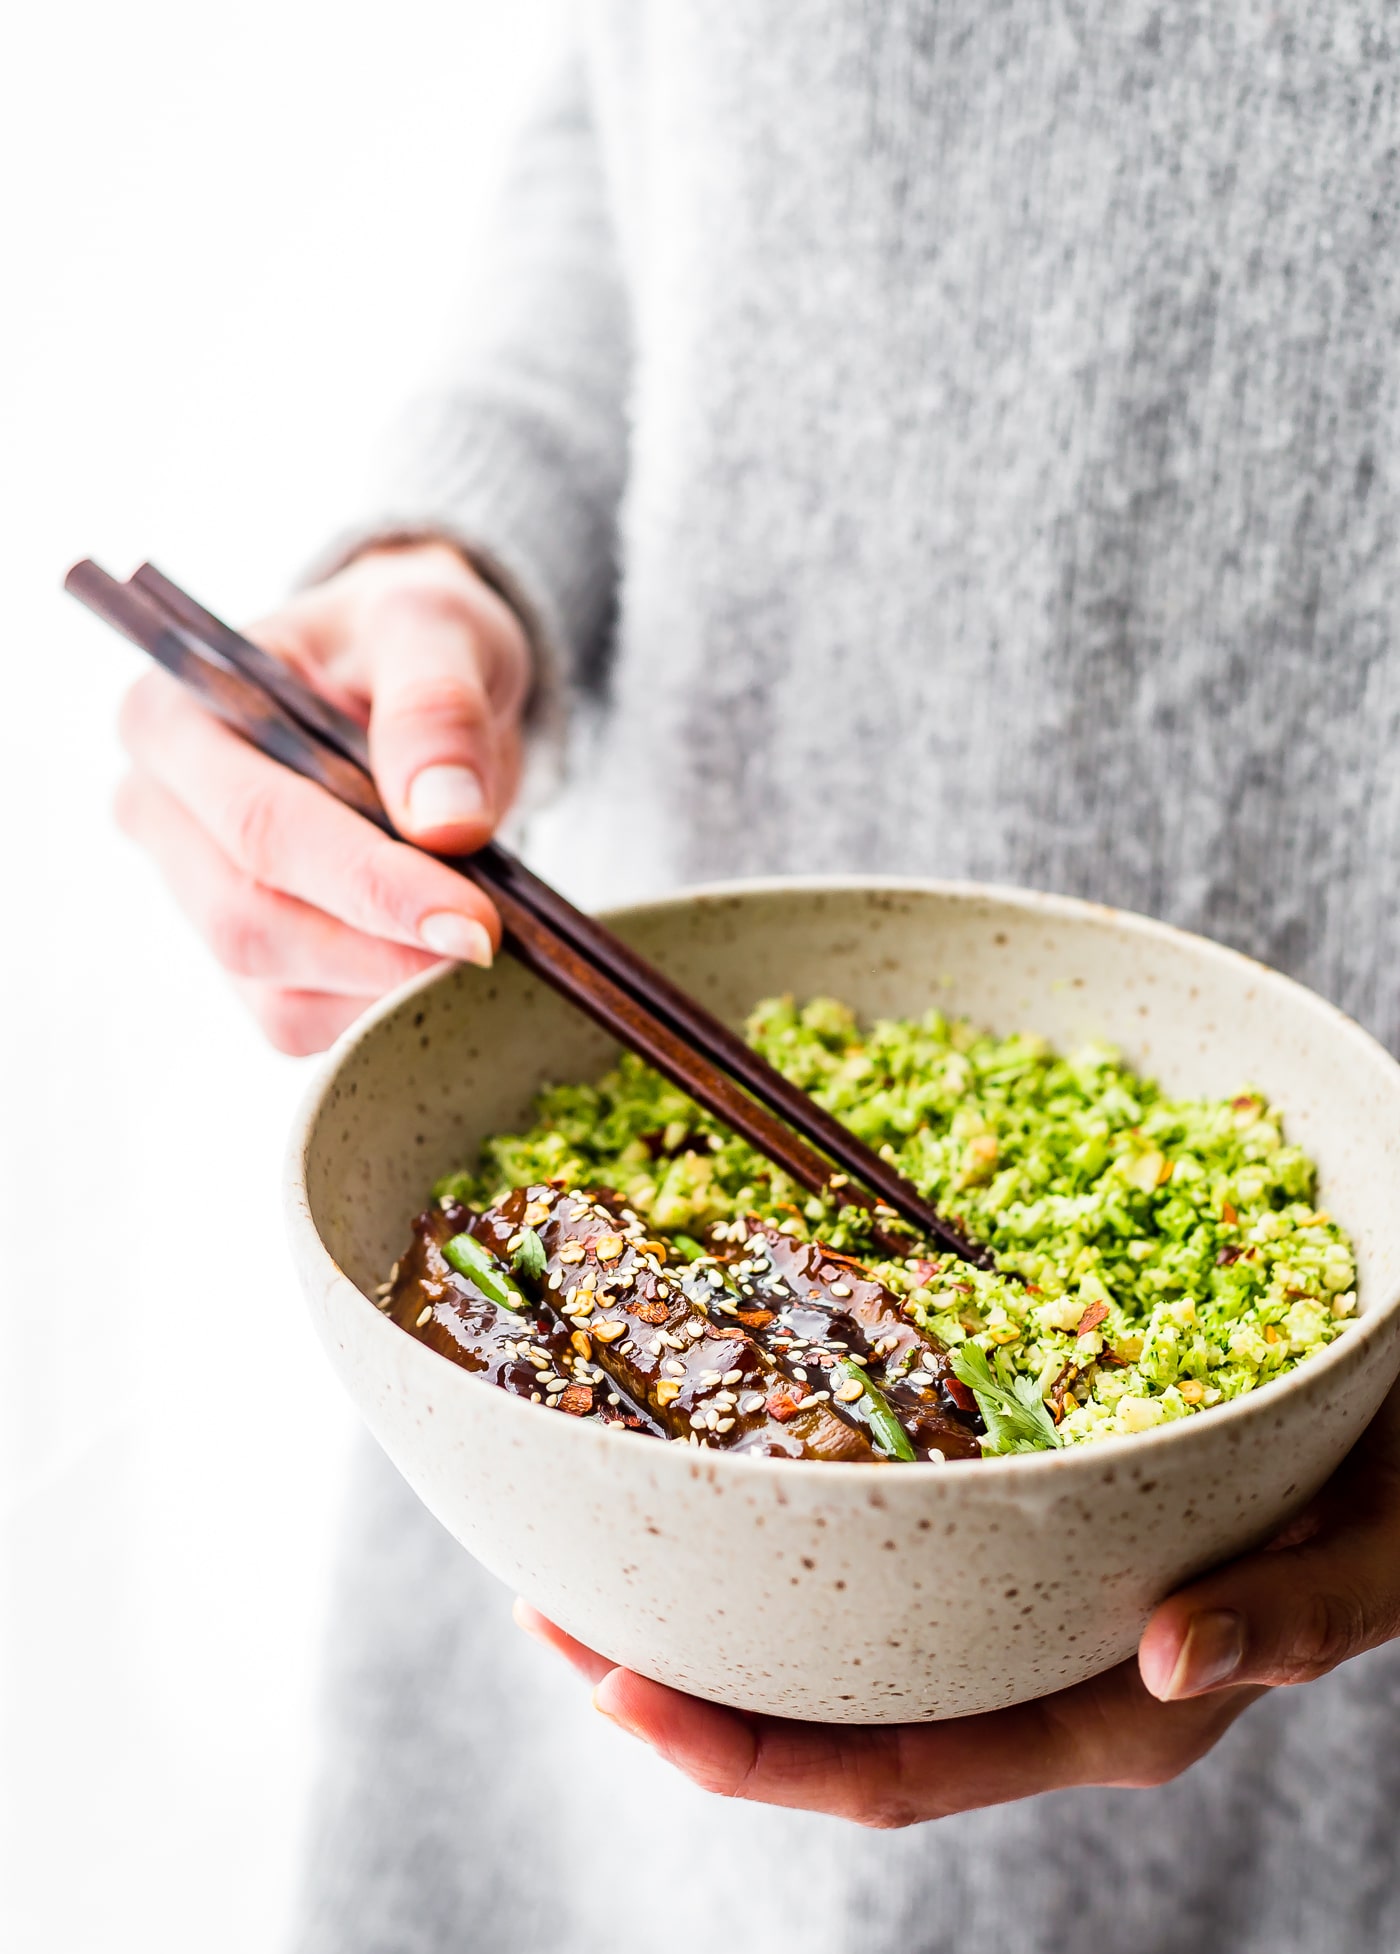 These Paleo Mongolian Beef Broccoli "Rice" Bowls are quick to make, light, and full of garlic and ginger flavors! A Healthy Asian homemade takeout recipe!